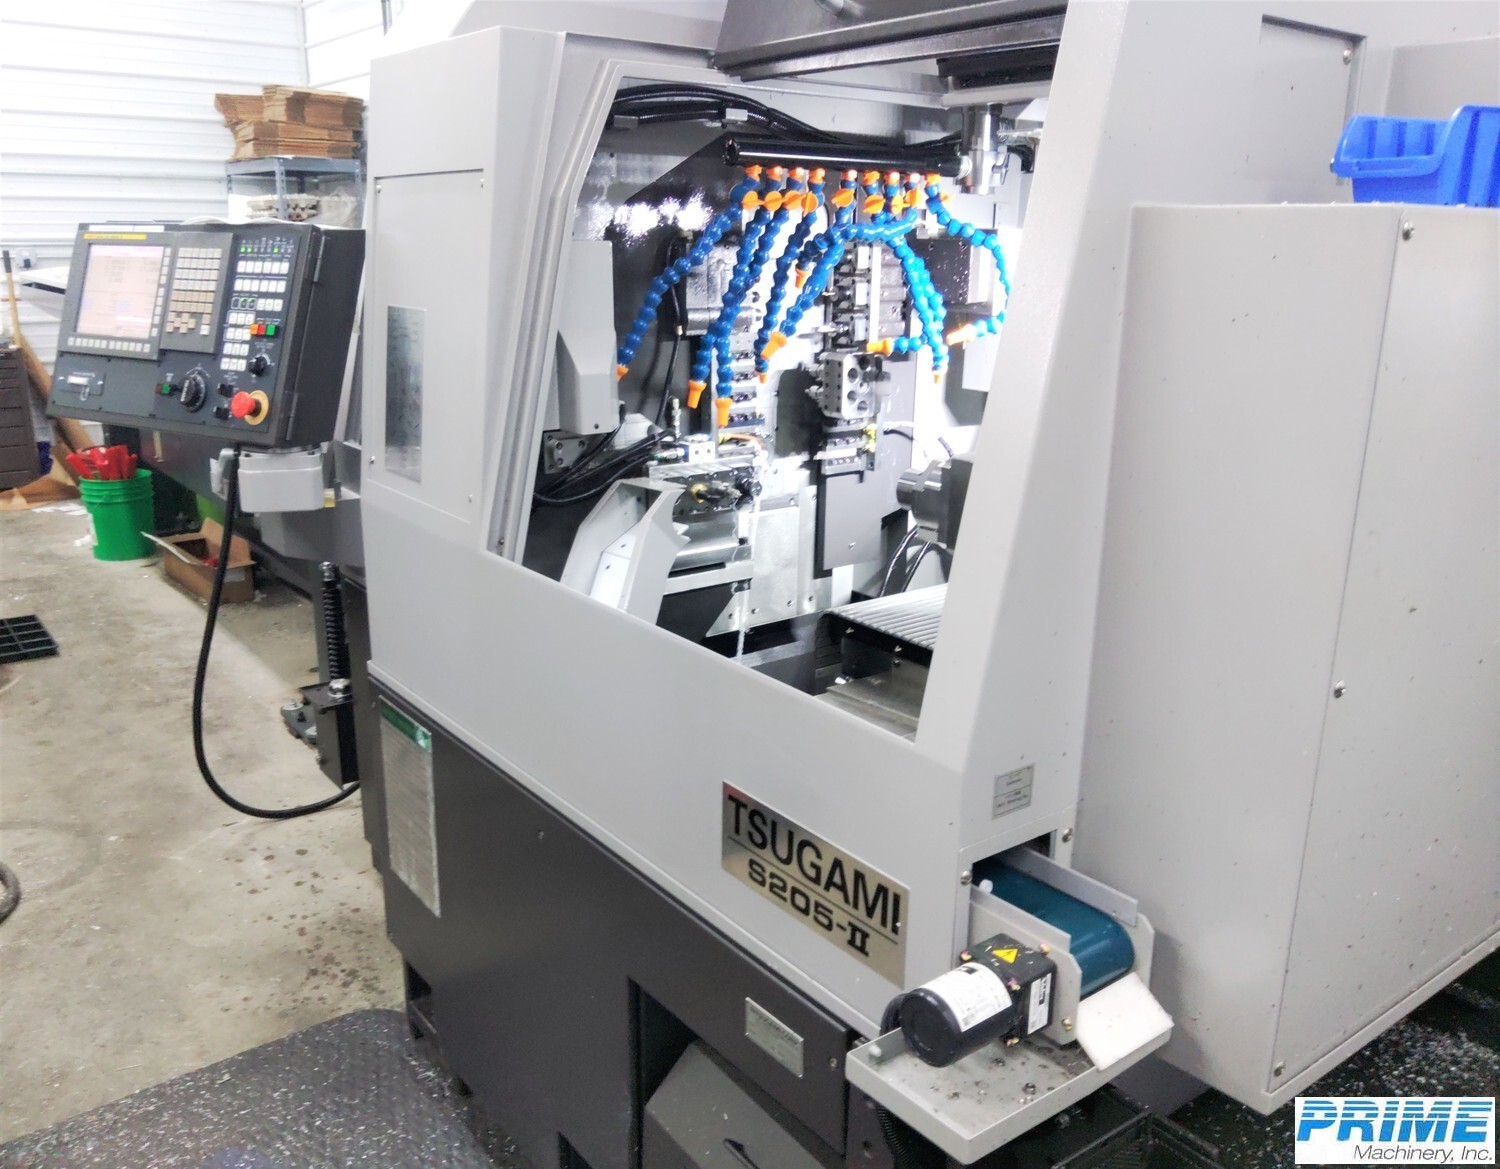 2020 TSUGAMI S205-II 5-Axis or More CNC Lathes | Prime Machinery